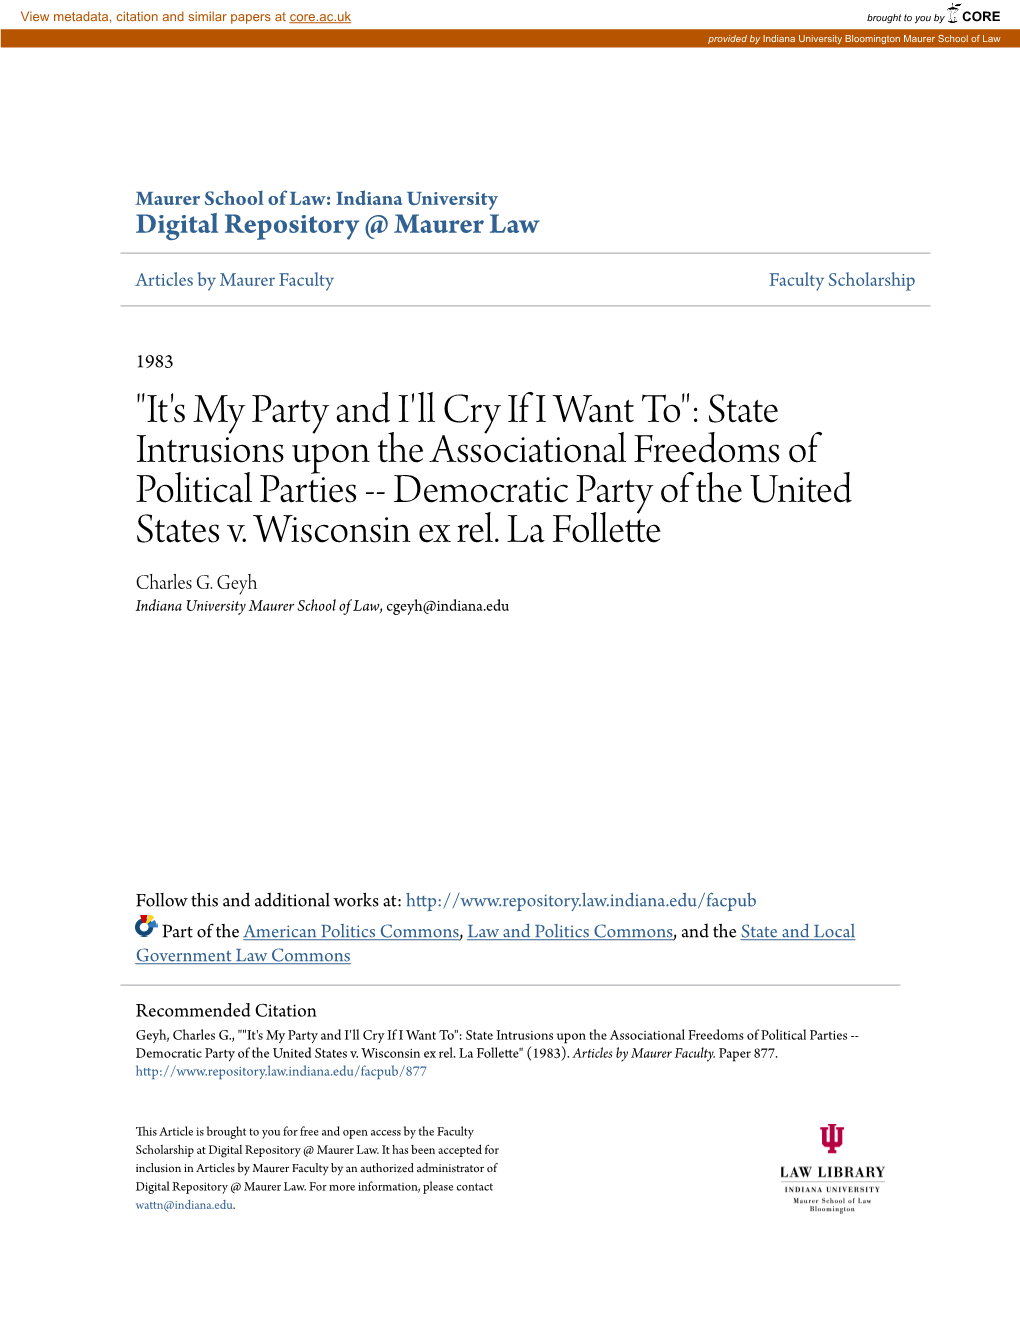 It's My Party and I'll Cry If I Want To": State Intrusions Upon the Associational Freedoms of Political Parties -- Democratic Party of the United States V